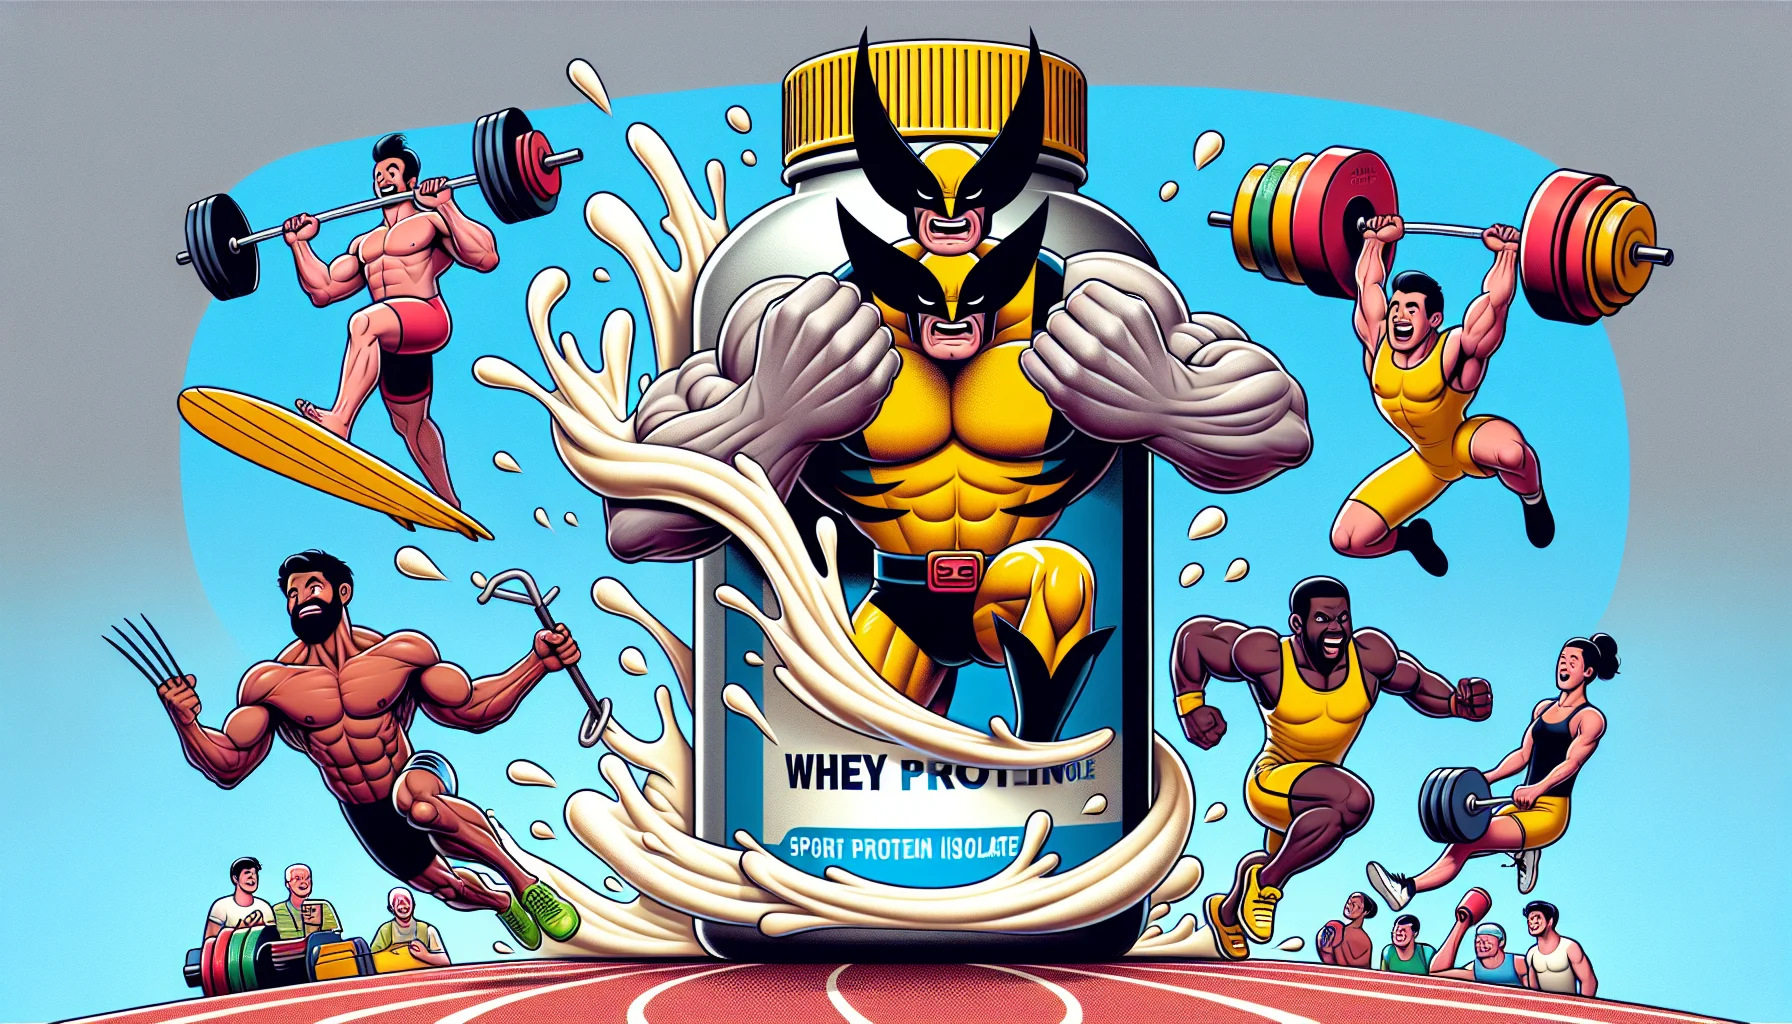 Create a vibrant and amusing scenario around a creatively imagined sports supplement canister labeled as 'Whey Protein Isolate'. The canister boasts a thick, robust, and playful design akin to a comic-style, cool anthropomorphic wolverine. He's muscular and exhibiting some lively weightlifting moves to emphasize strength and power. Surrounding the wolverine are lively cartoon-style athletes, a male Native Hawaiian surfer riding a protein shake wave, a female Hispanic powerlifter lifting barbells, a male Caucasian gymnast effortlessly doing a flip, and a Black female sprinter running along a track that wraps around the supplement canister. This creative depiction hints at the benefits of sports supplements for diverse sports activities.